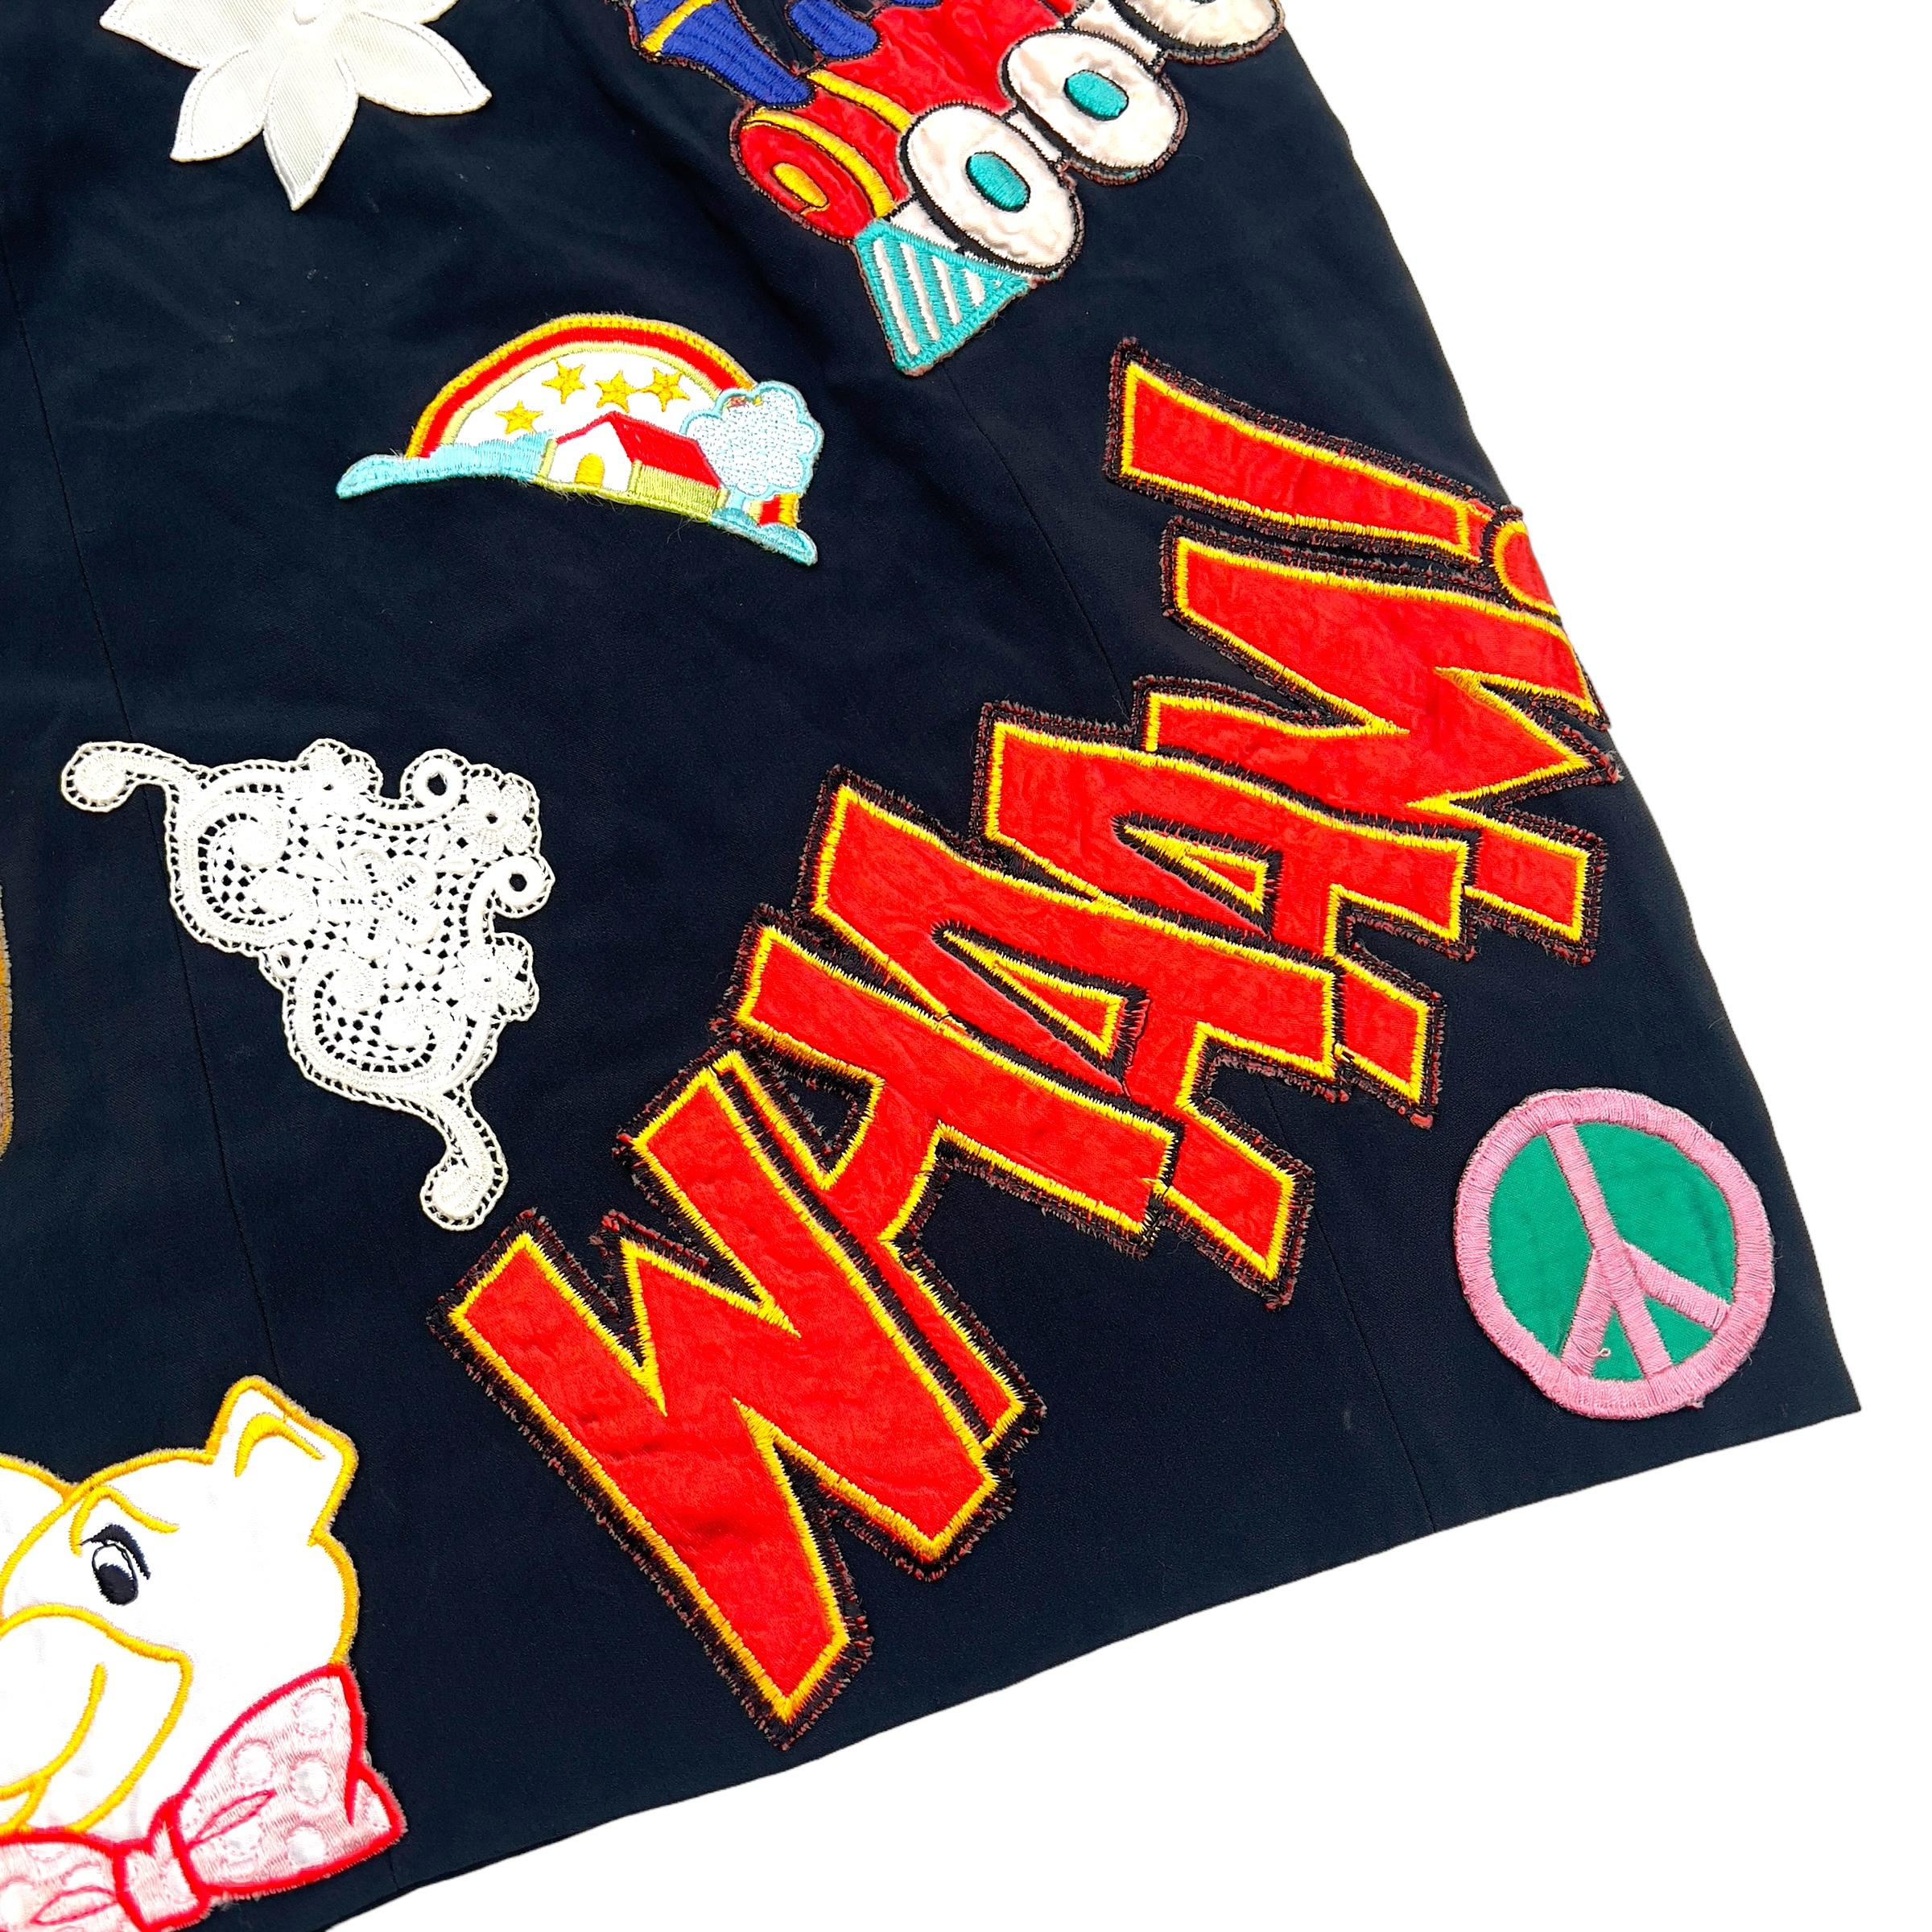 1993 Moschino runway kiss my patch dress In Fair Condition For Sale In CAPELLE AAN DEN IJSSEL, ZH